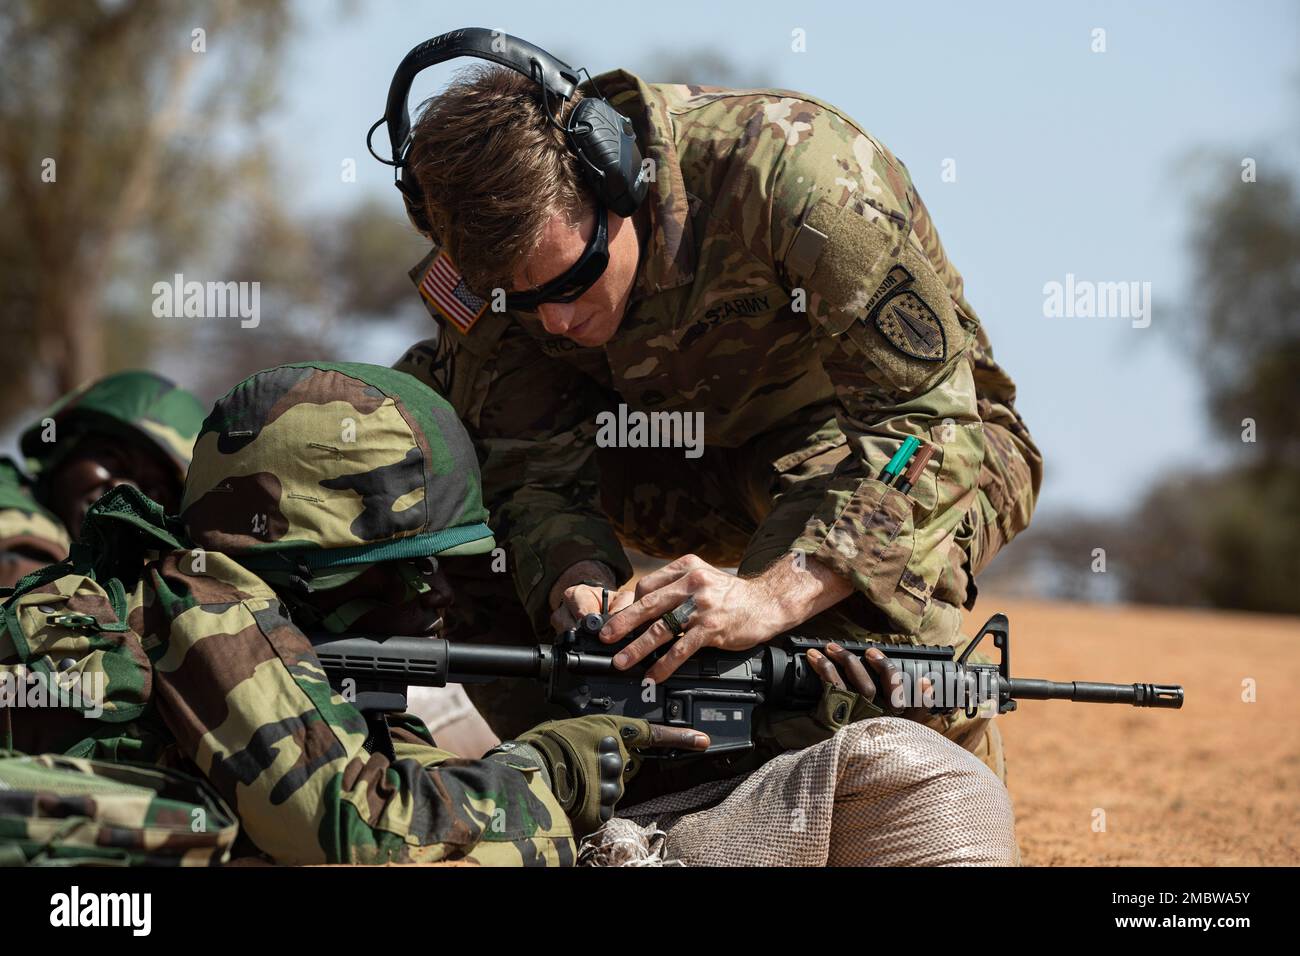 U.S. Army Sgt. 1st Class Andrew Pierce, with Maneuver Company Advisor Team, 2nd Security Forces Assistance Brigade, adjusts an M-4 Carbine during African Lion 22 in Dodji, Senegal, June 22, 2022. African Lion 22 is U.S. Africa Command’s largest, premier, joint, annual exercise hosted by Morocco, Ghana, Senegal and Tunisia, June 6-30. More than 7,500 participants from 28 nations and NATO train together with a focus on enhancing readiness for U.S. and partner nation forces. AL22 is a joint all-domain, multi-component and multinational exercise, employing a full array of mission capabilities with Stock Photo